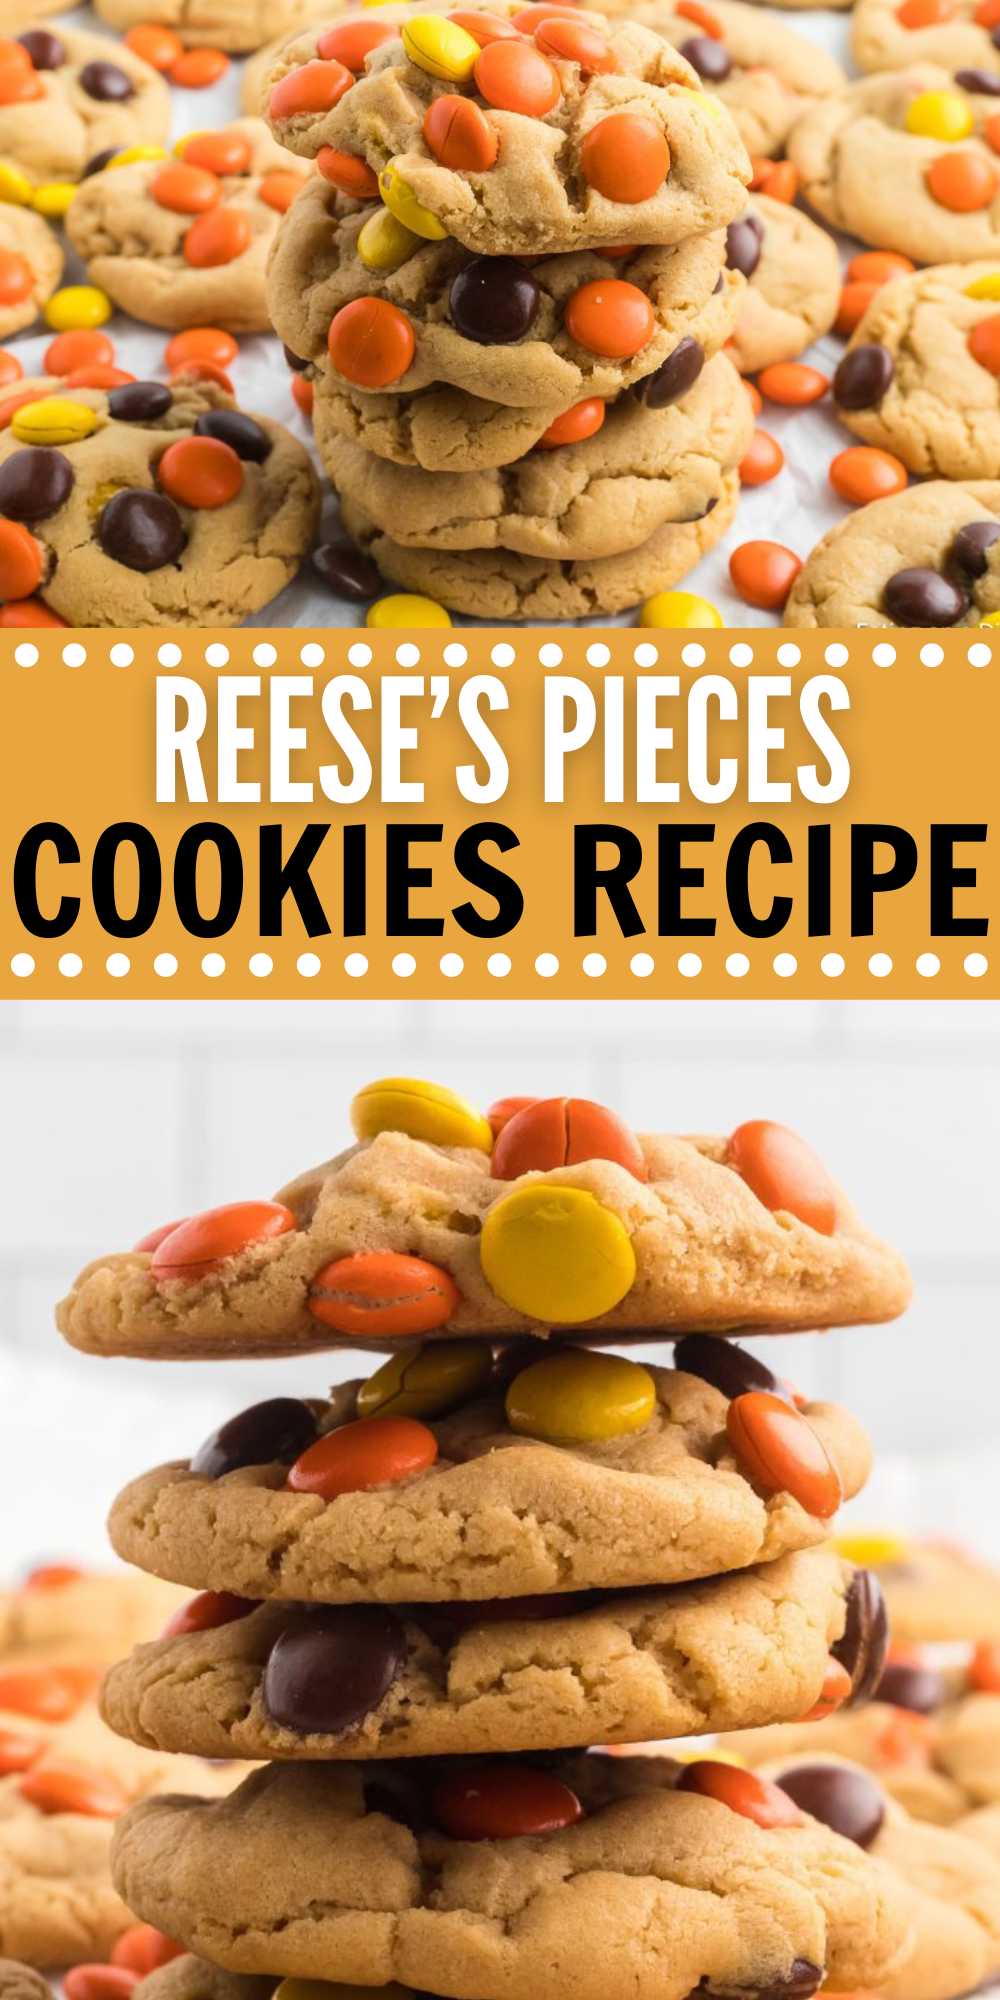 Reese's Pieces Cookies is a delicious peanut butter flavor cookies. They are soft, delicious and easy to make with simple ingredients. If you are looking for the perfect holiday cookie, these Reese's Pieces Cookies are the one to make. You can easily add in chocolate chips or white chocolate chips for added flavor and texture. #eatingonadime #reesespiecescookies #reesespieces